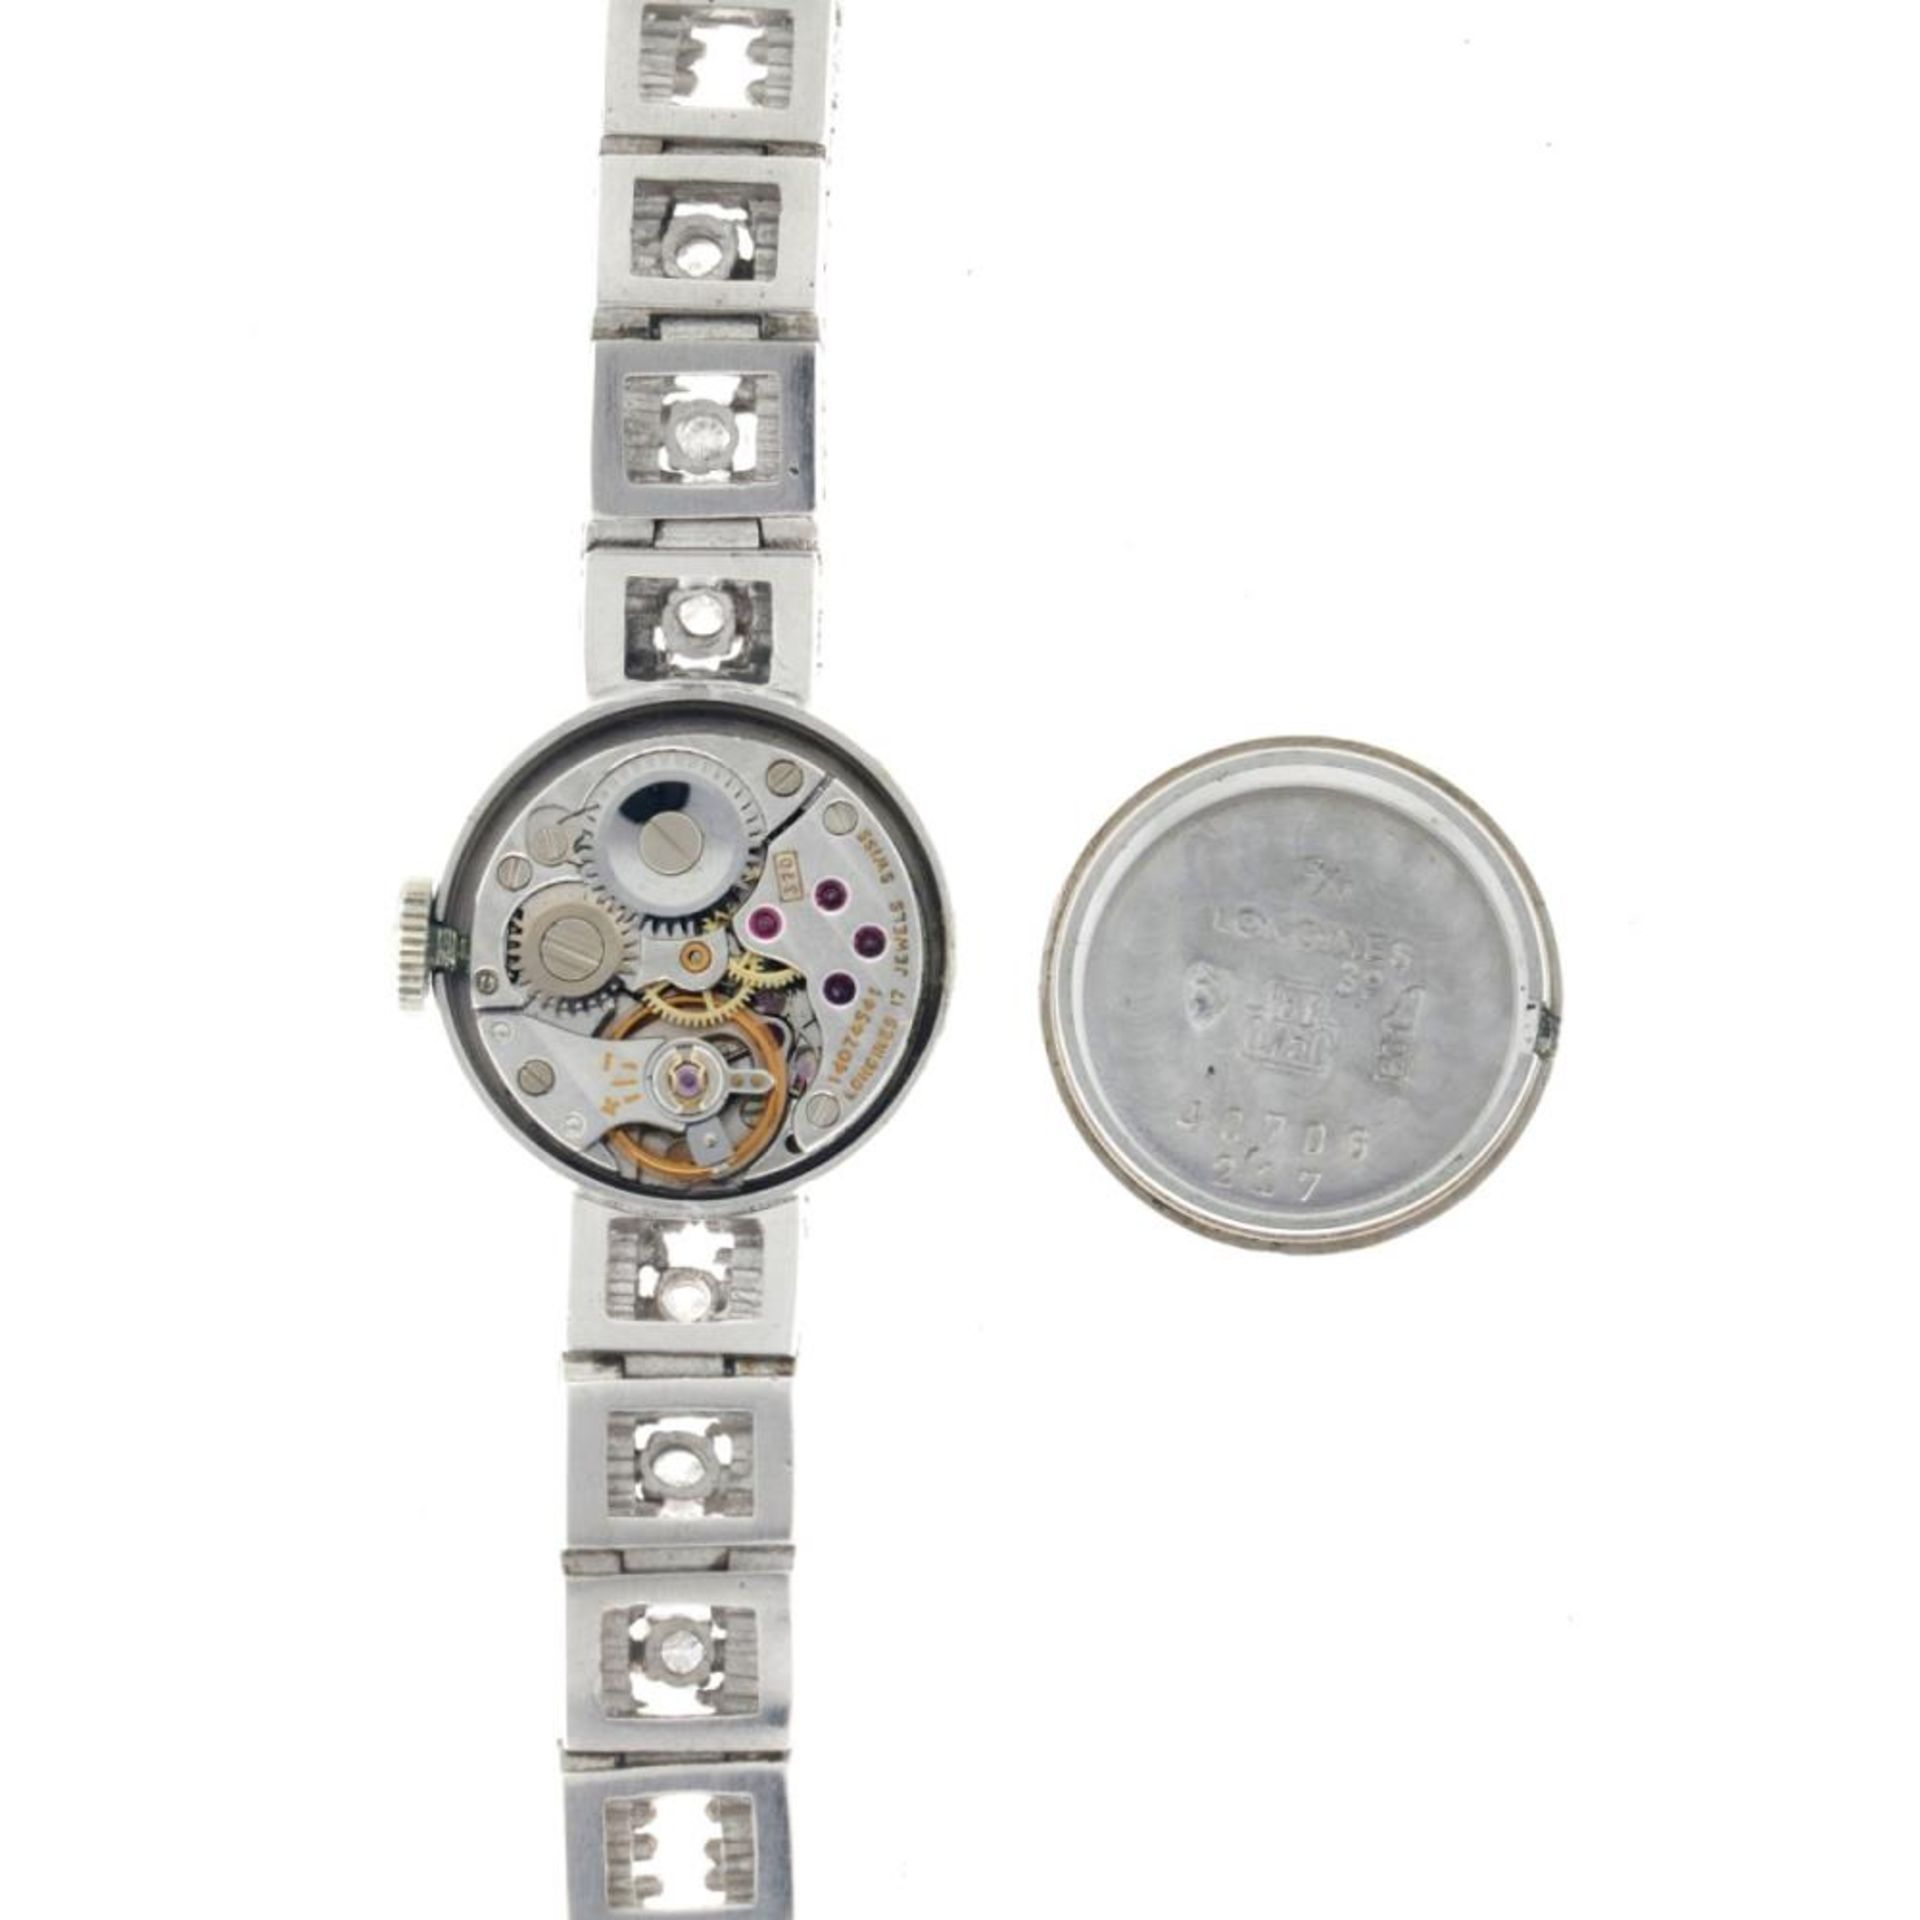 Longines - Ladies watch - approx. 1960. - Image 11 of 12